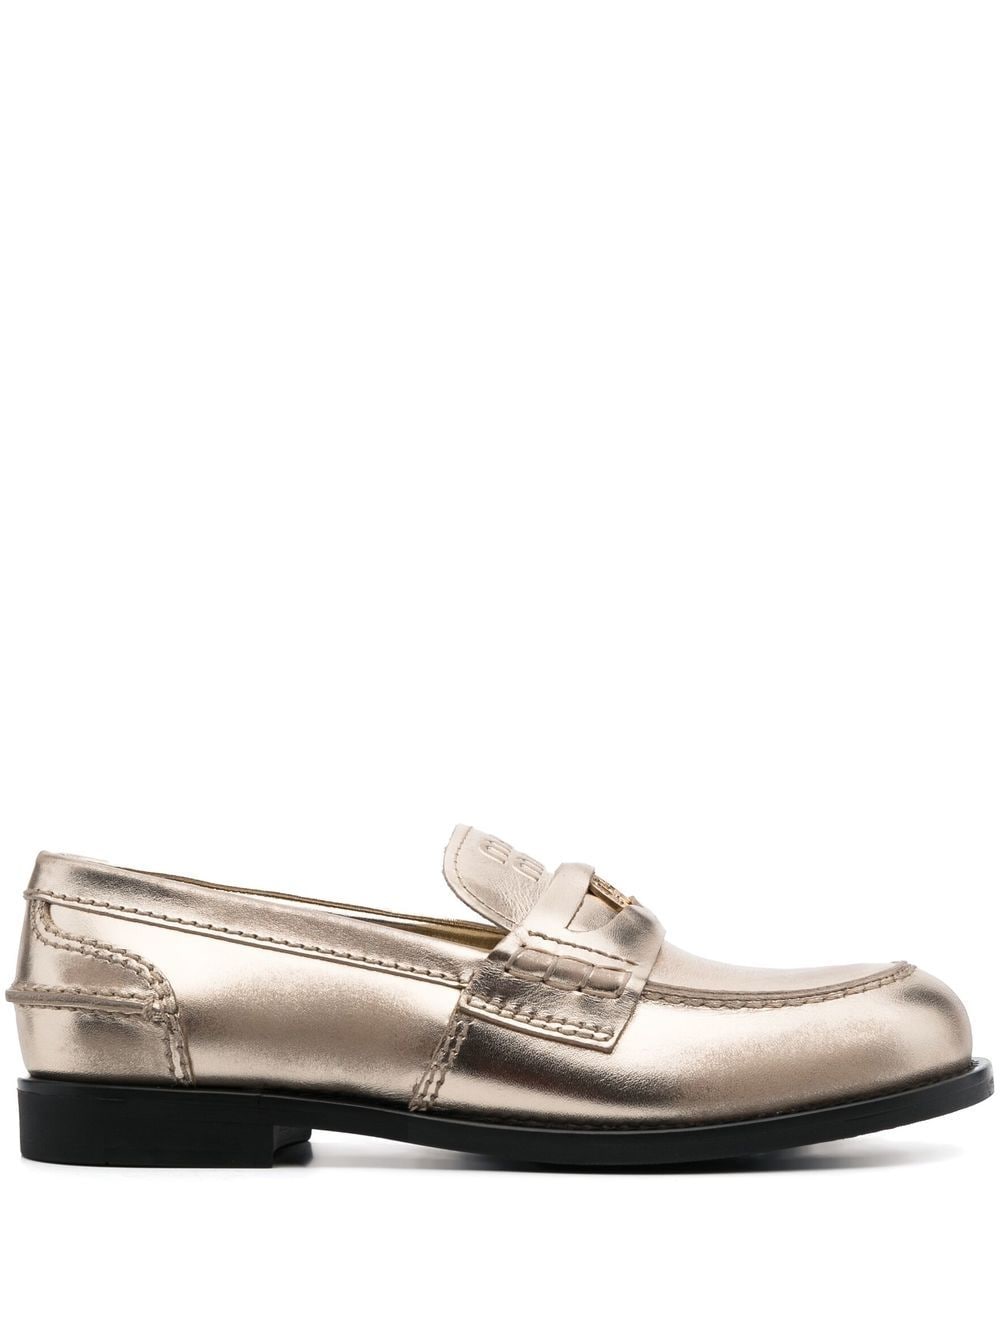 Miu Miu Leather Coin Penny Loafers In <p>